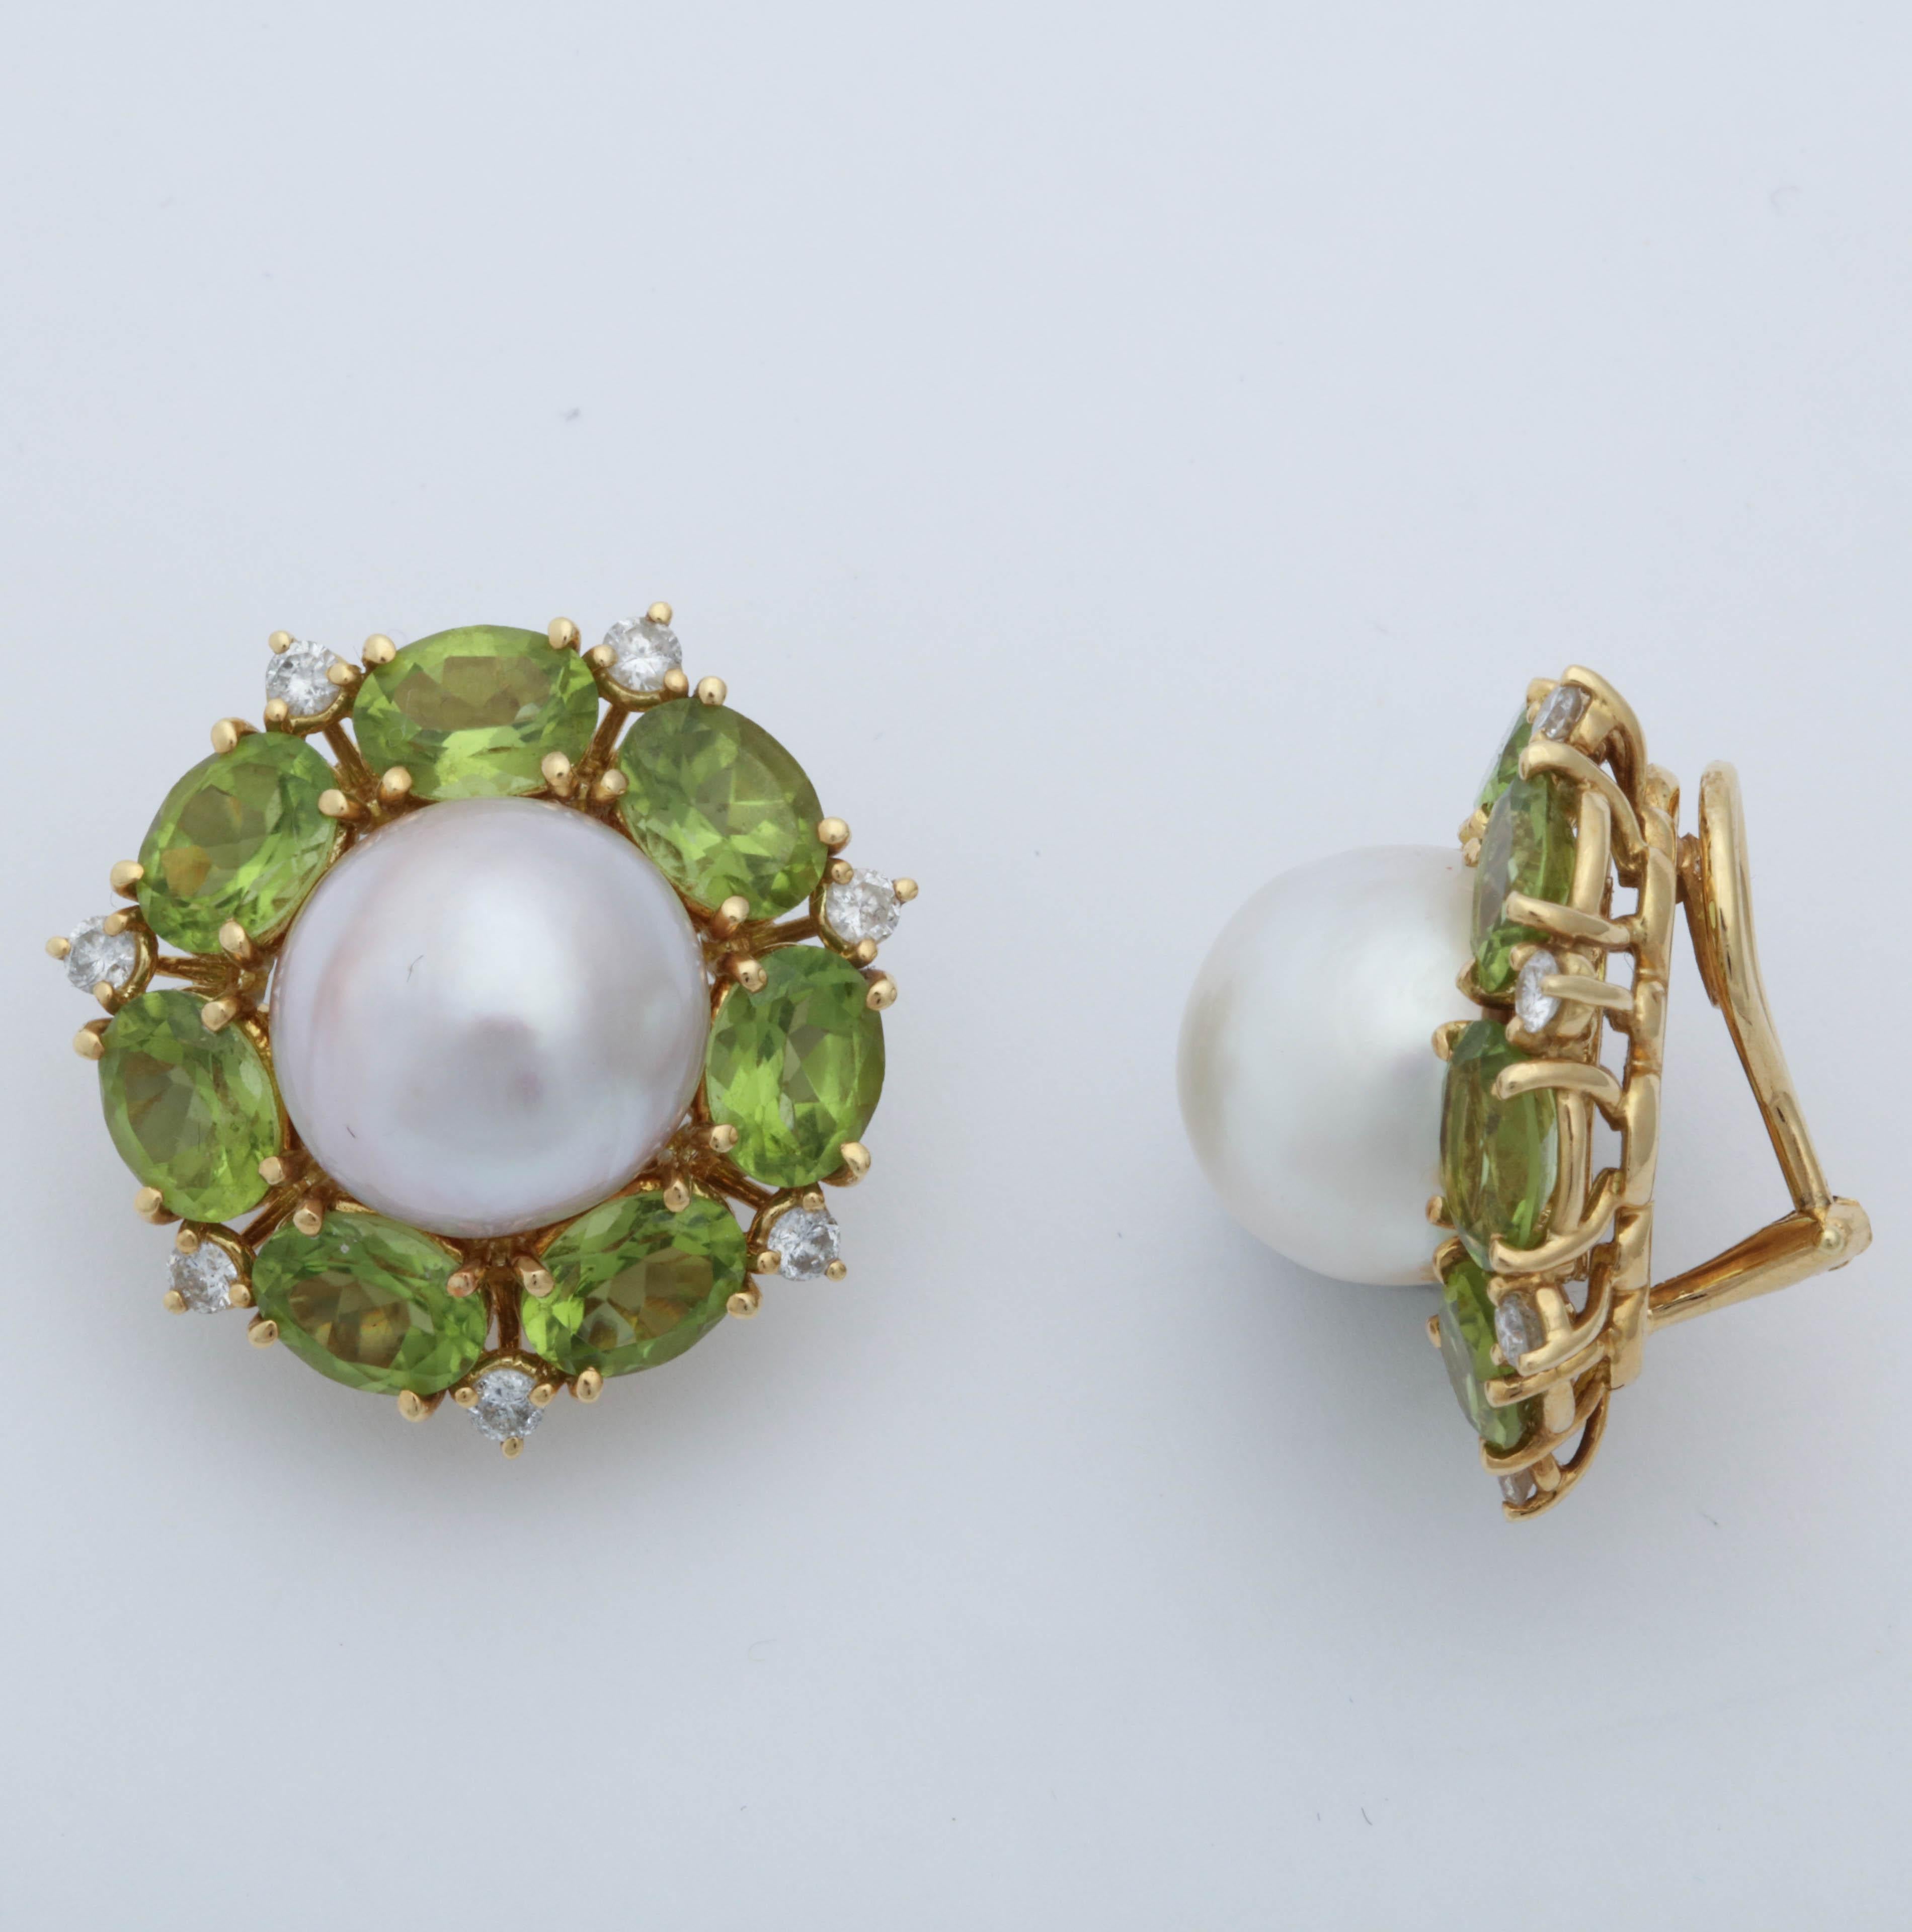 Oval Cut 1980s Seaman Schepps South Sea Pearl with Peridots and Diamonds Earclips